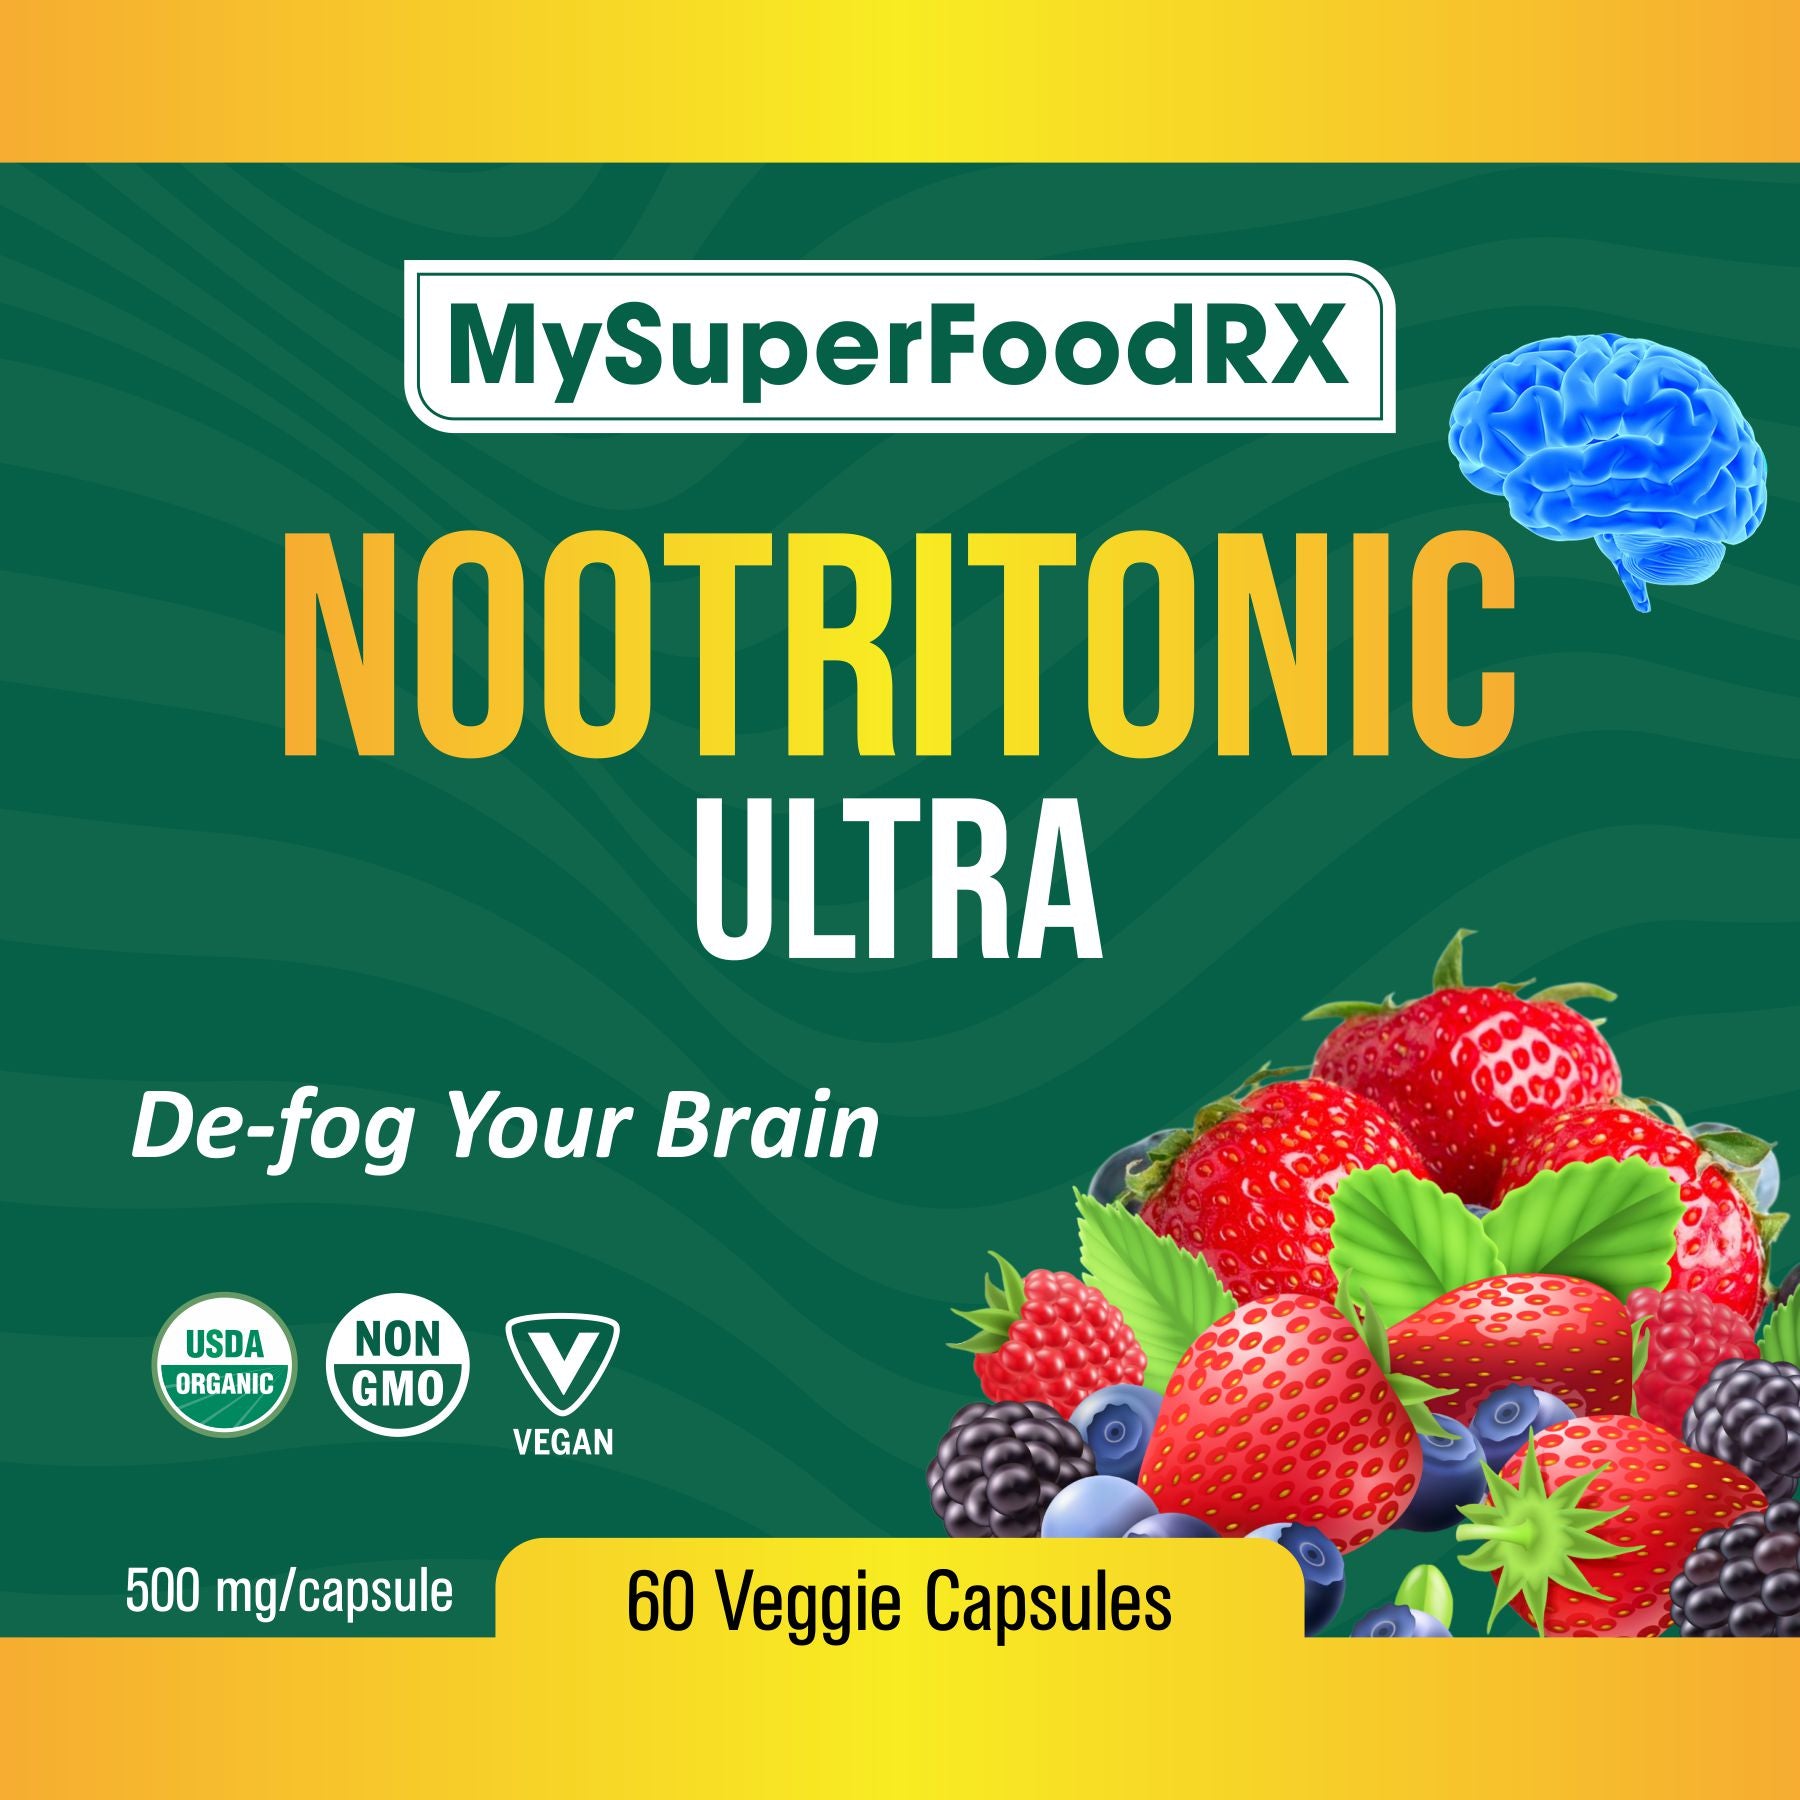 a box of my superfood rx nootritonic ultra